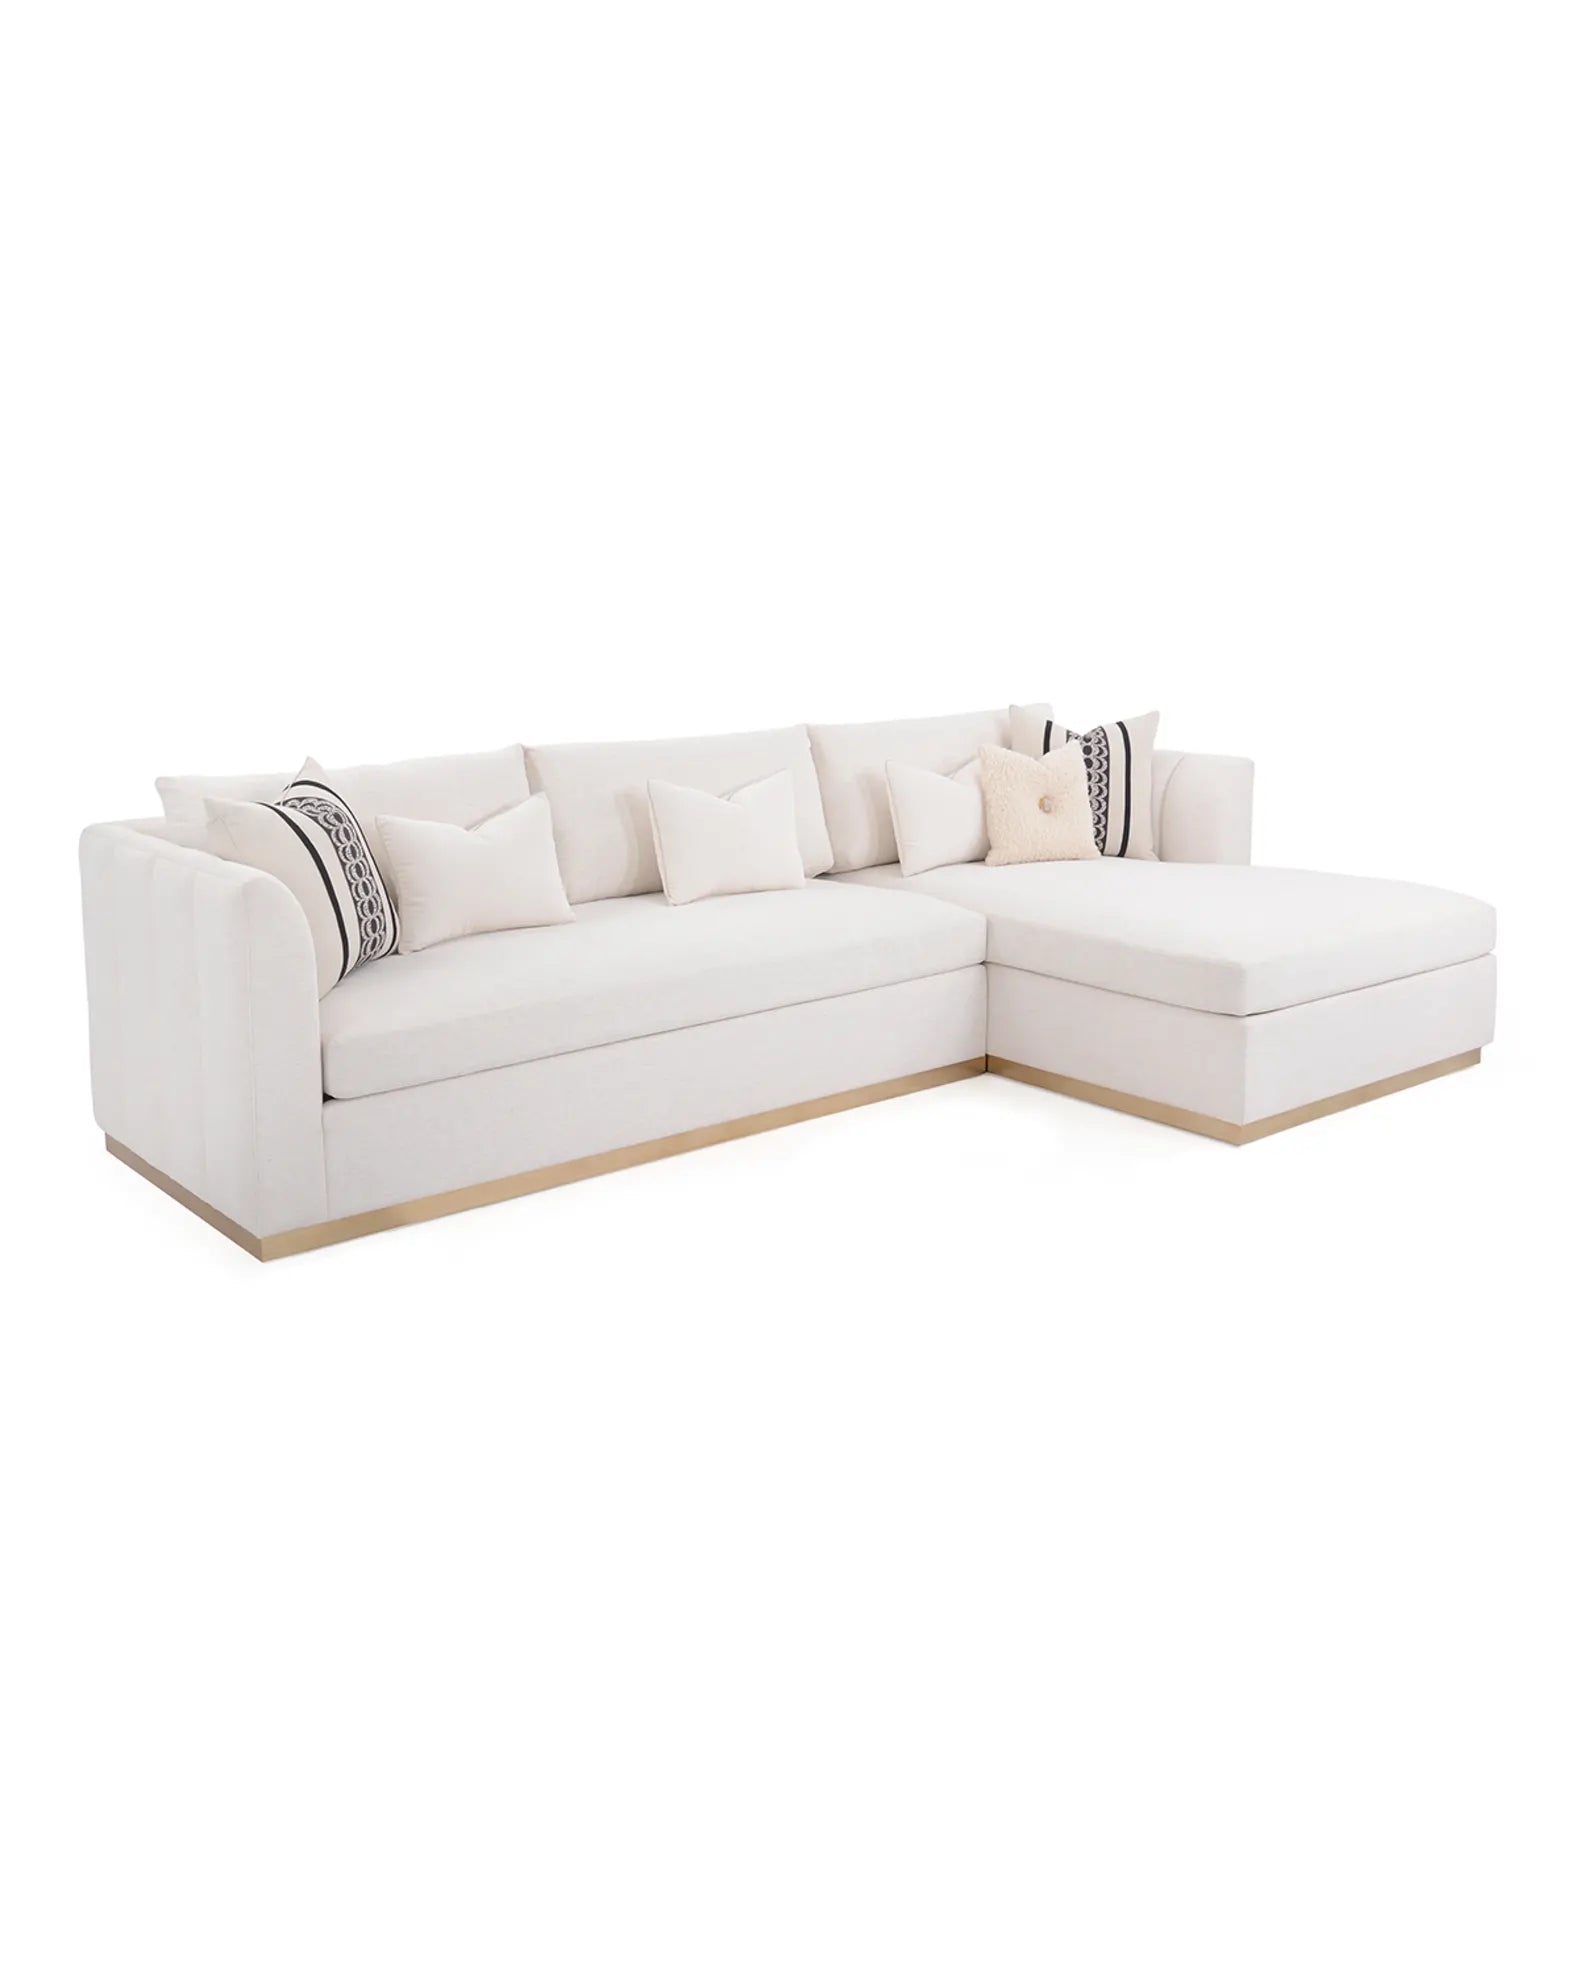 John-Richard Collection Paris Right-Chaise Sectional